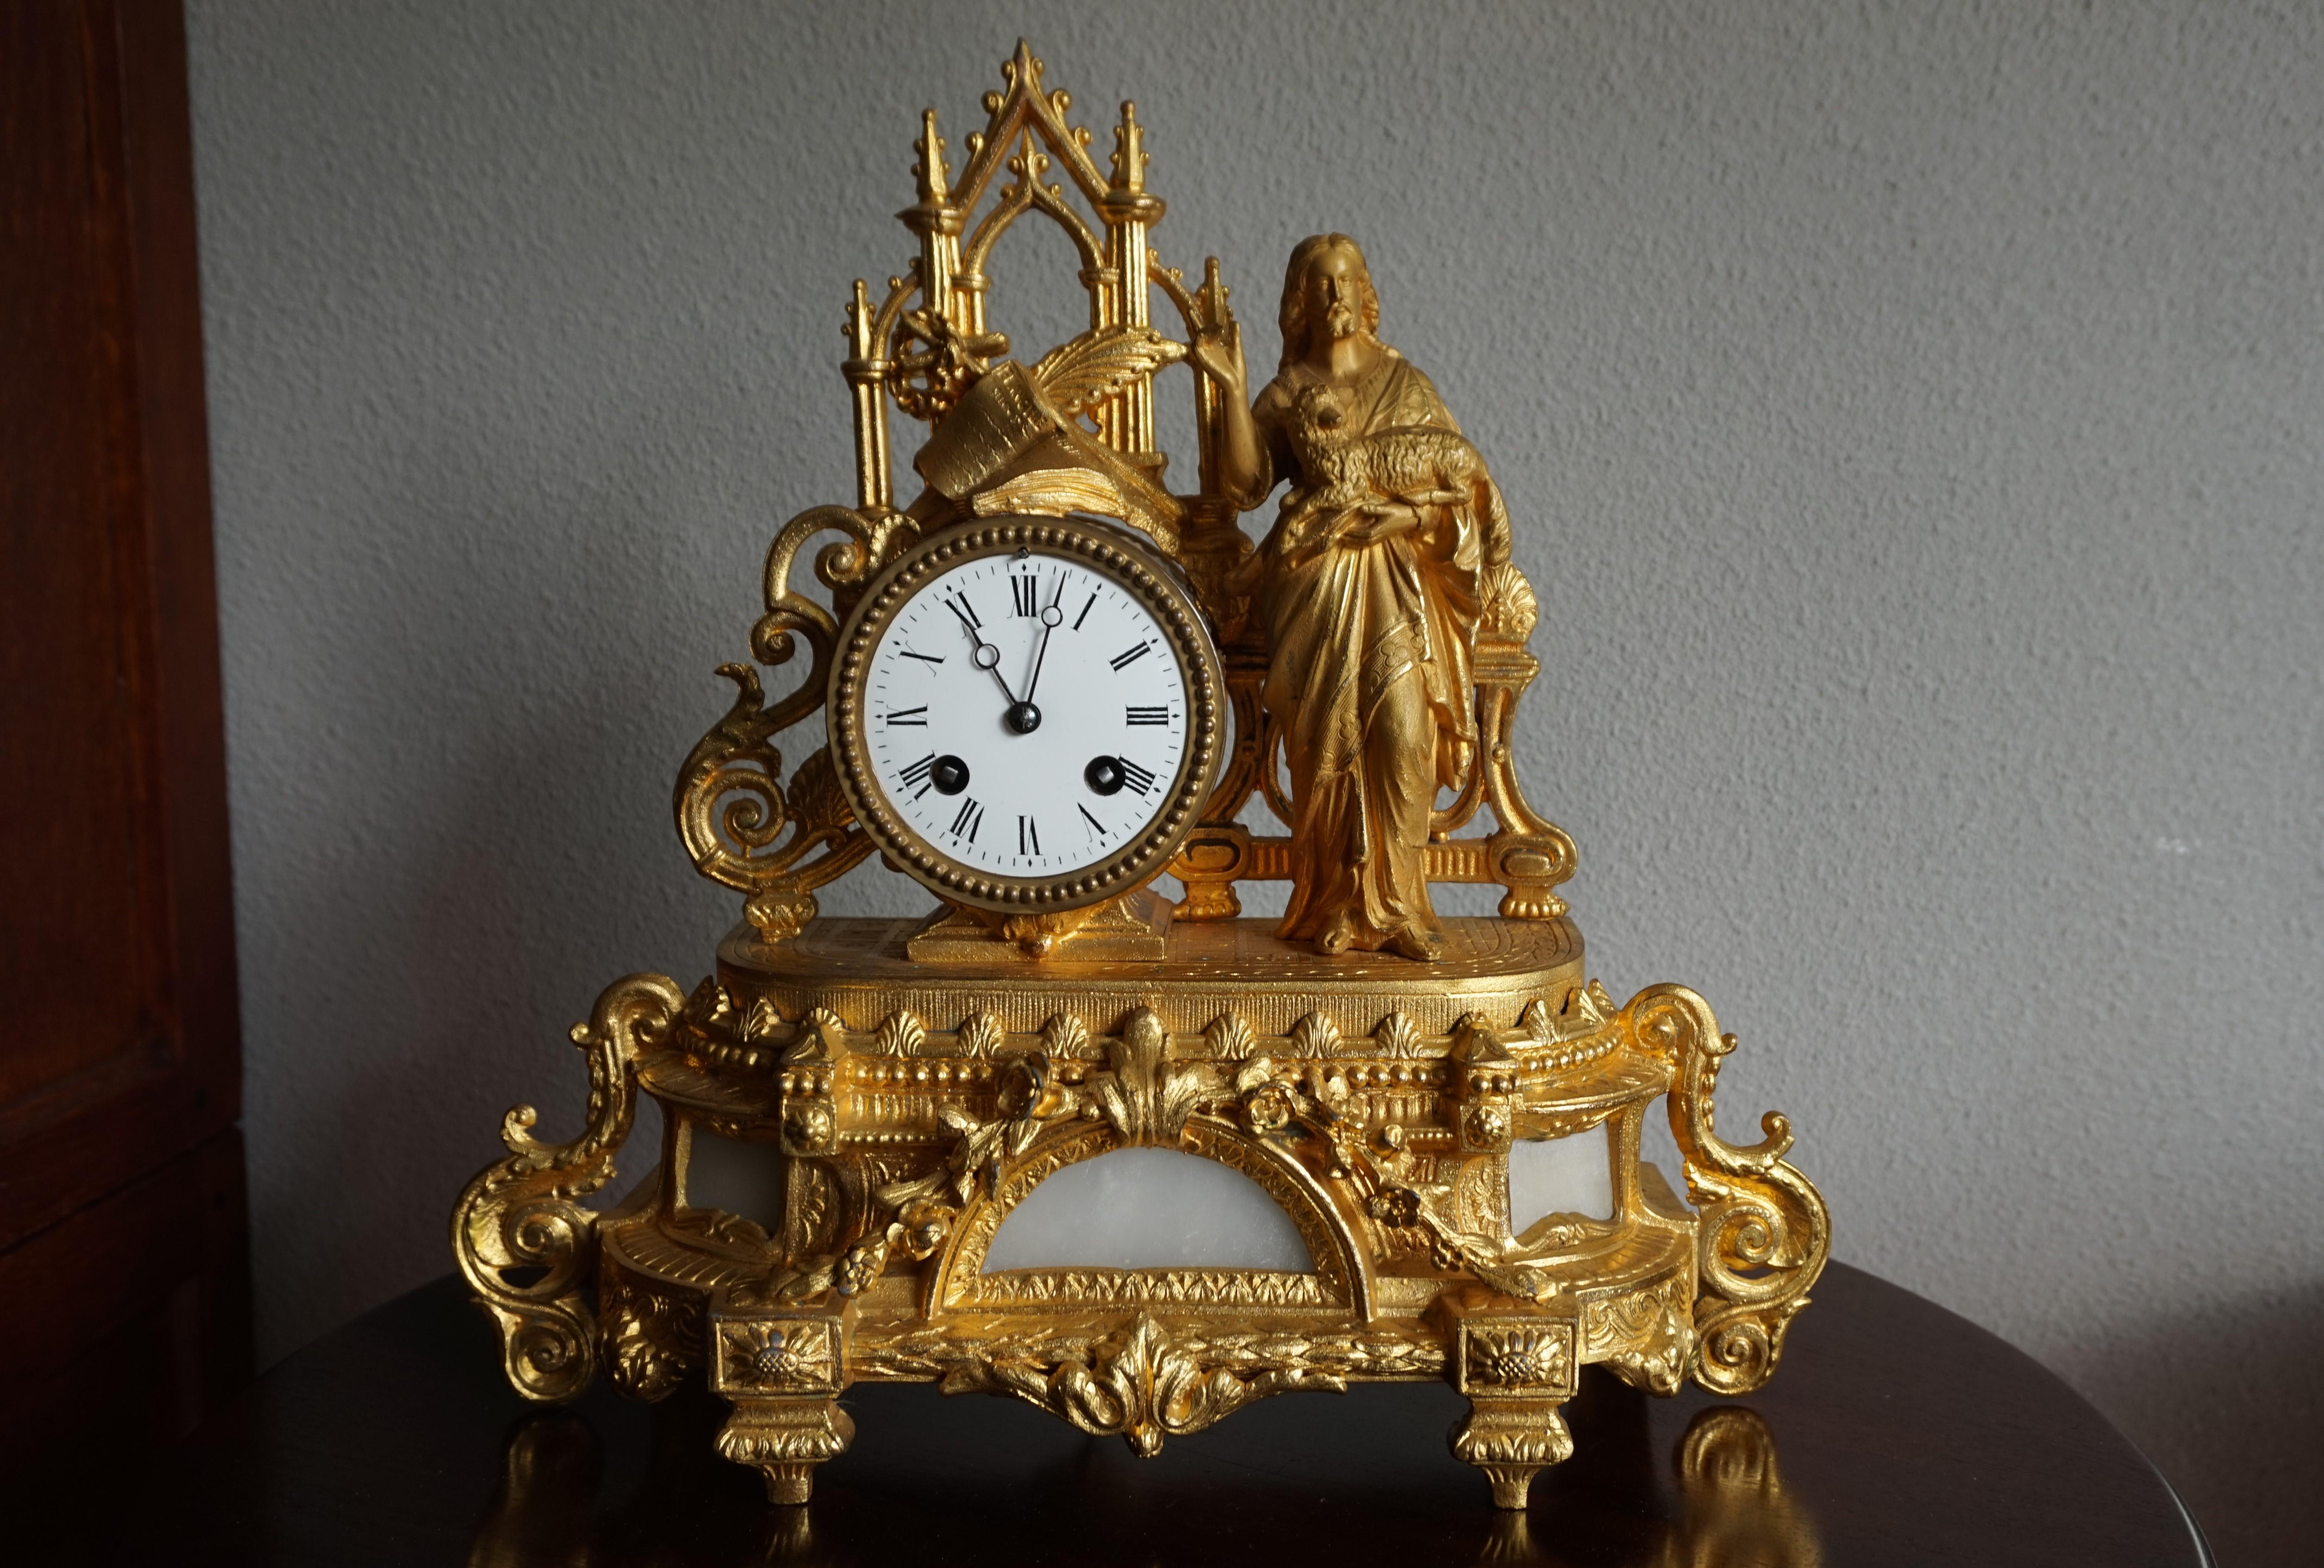 Stylish and meaningful Gothic mantel clock.

This elaborate clock and religious work of art into one dates back to the earliest years of the twentieth century. Standing on the richly decorated and alabaster inlaid base is Jesus holding a lamb. This